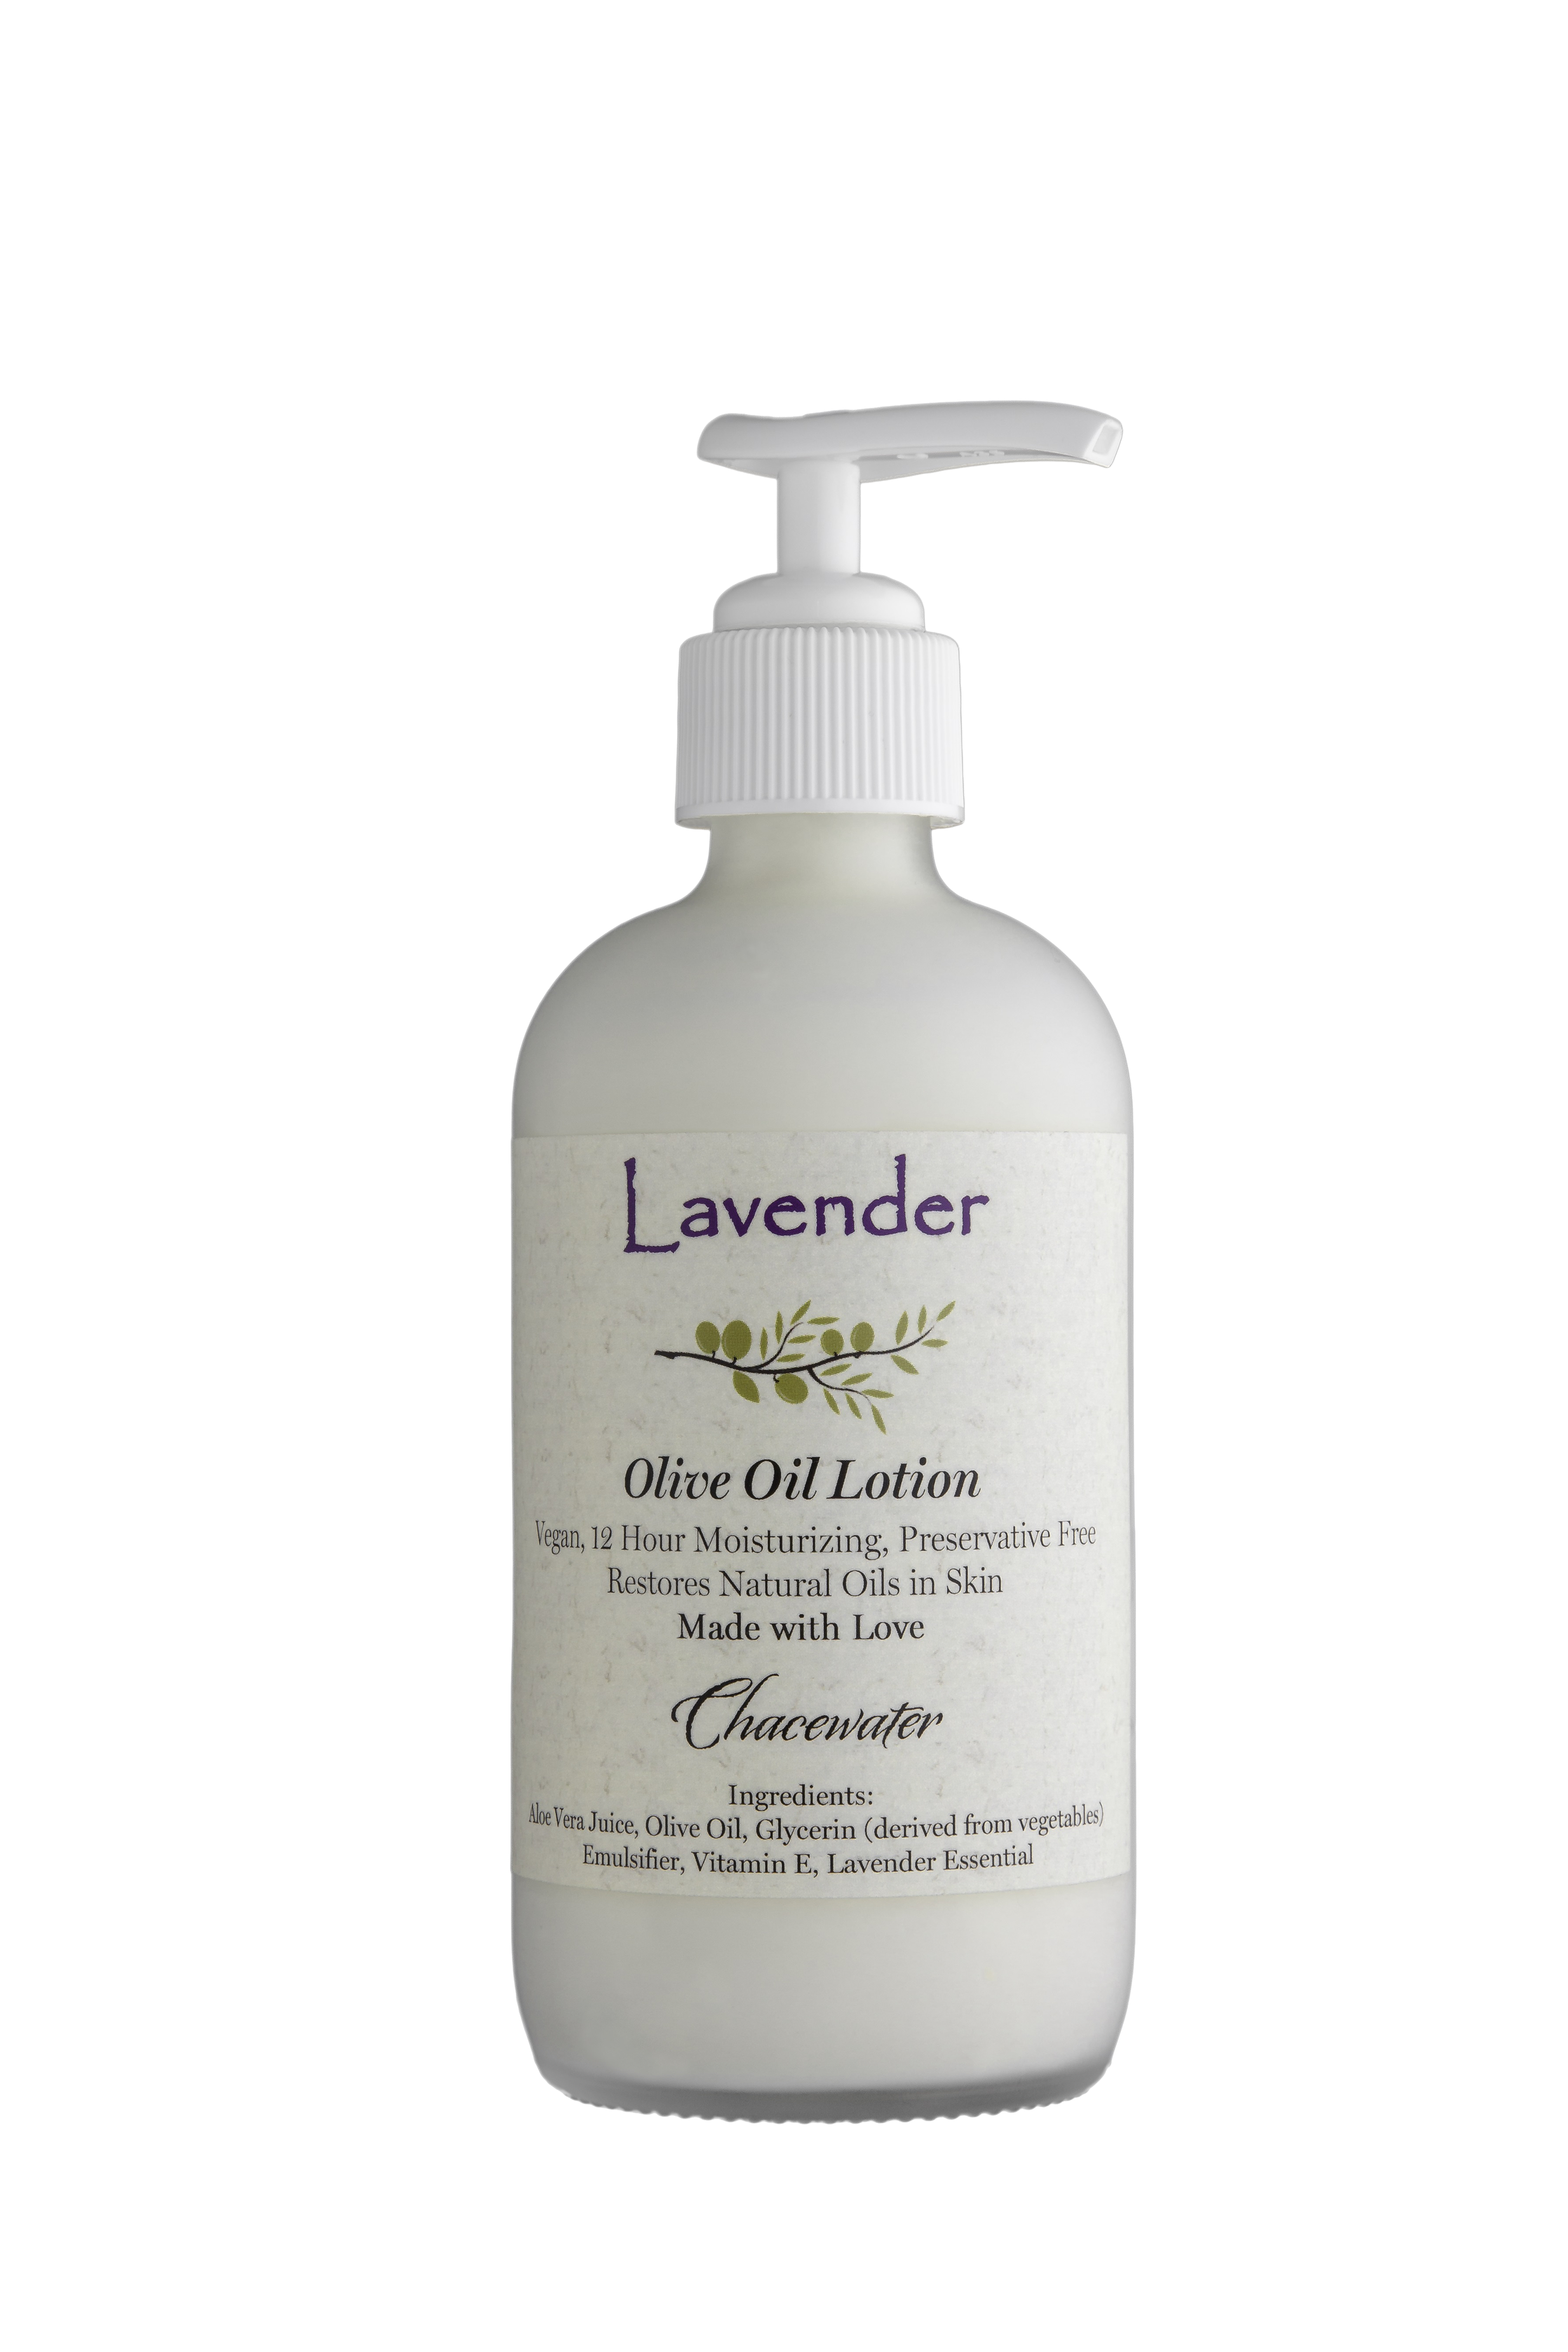 Product Image for Lavender Olive Oil Lotion